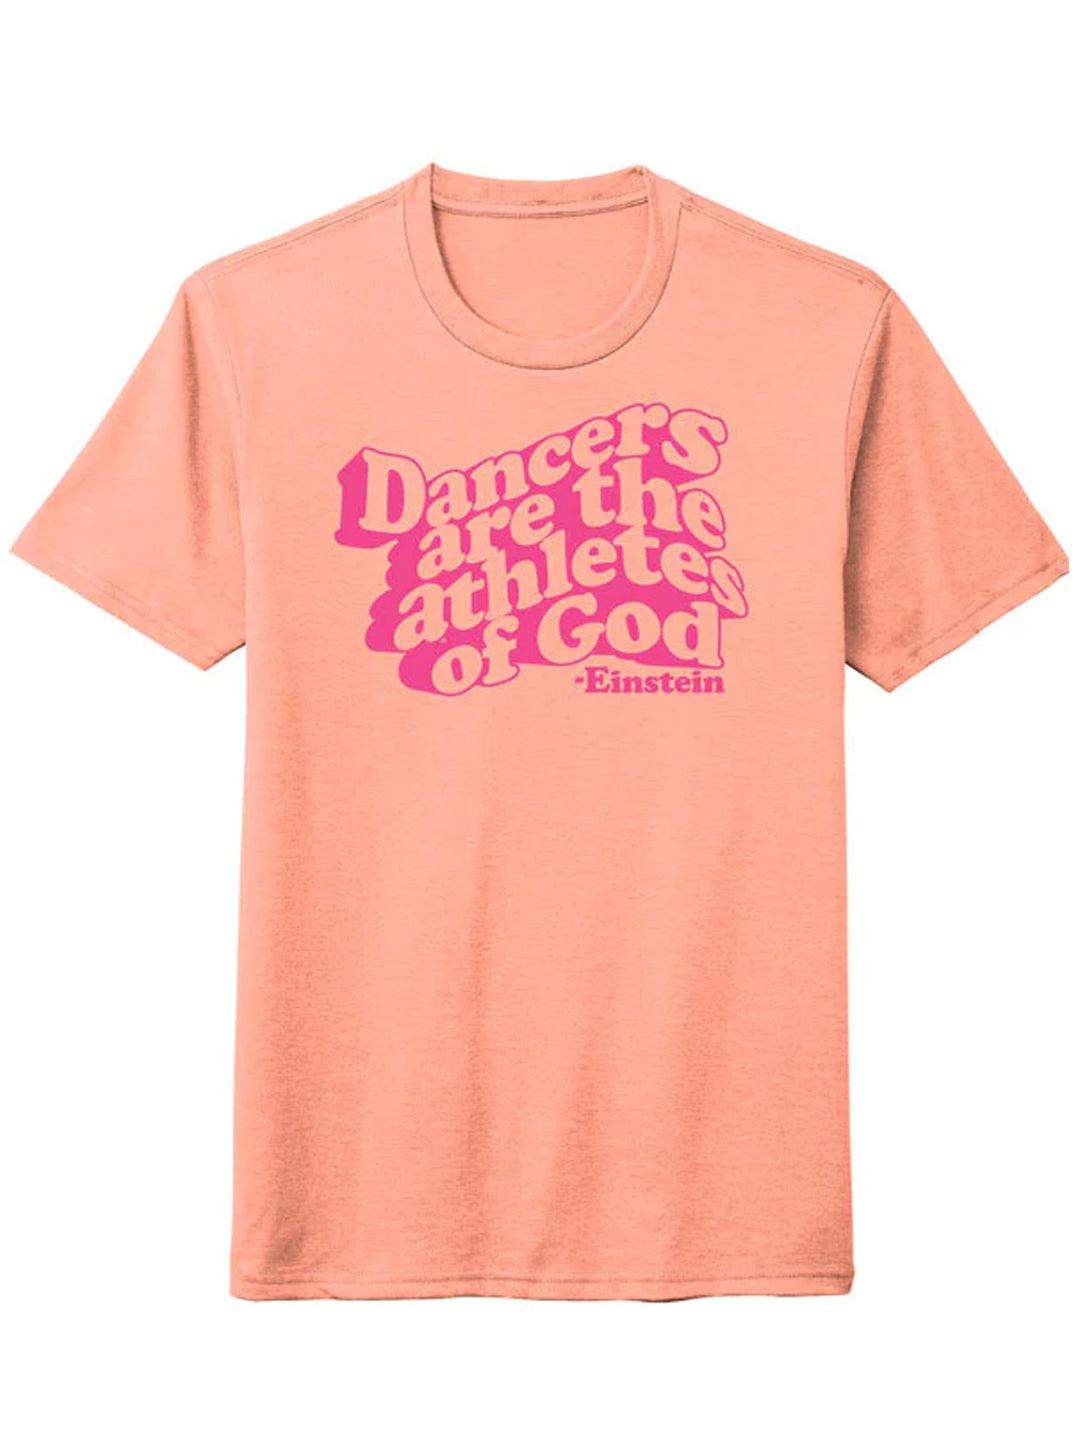 Dancers Are The Athletes of God Tee